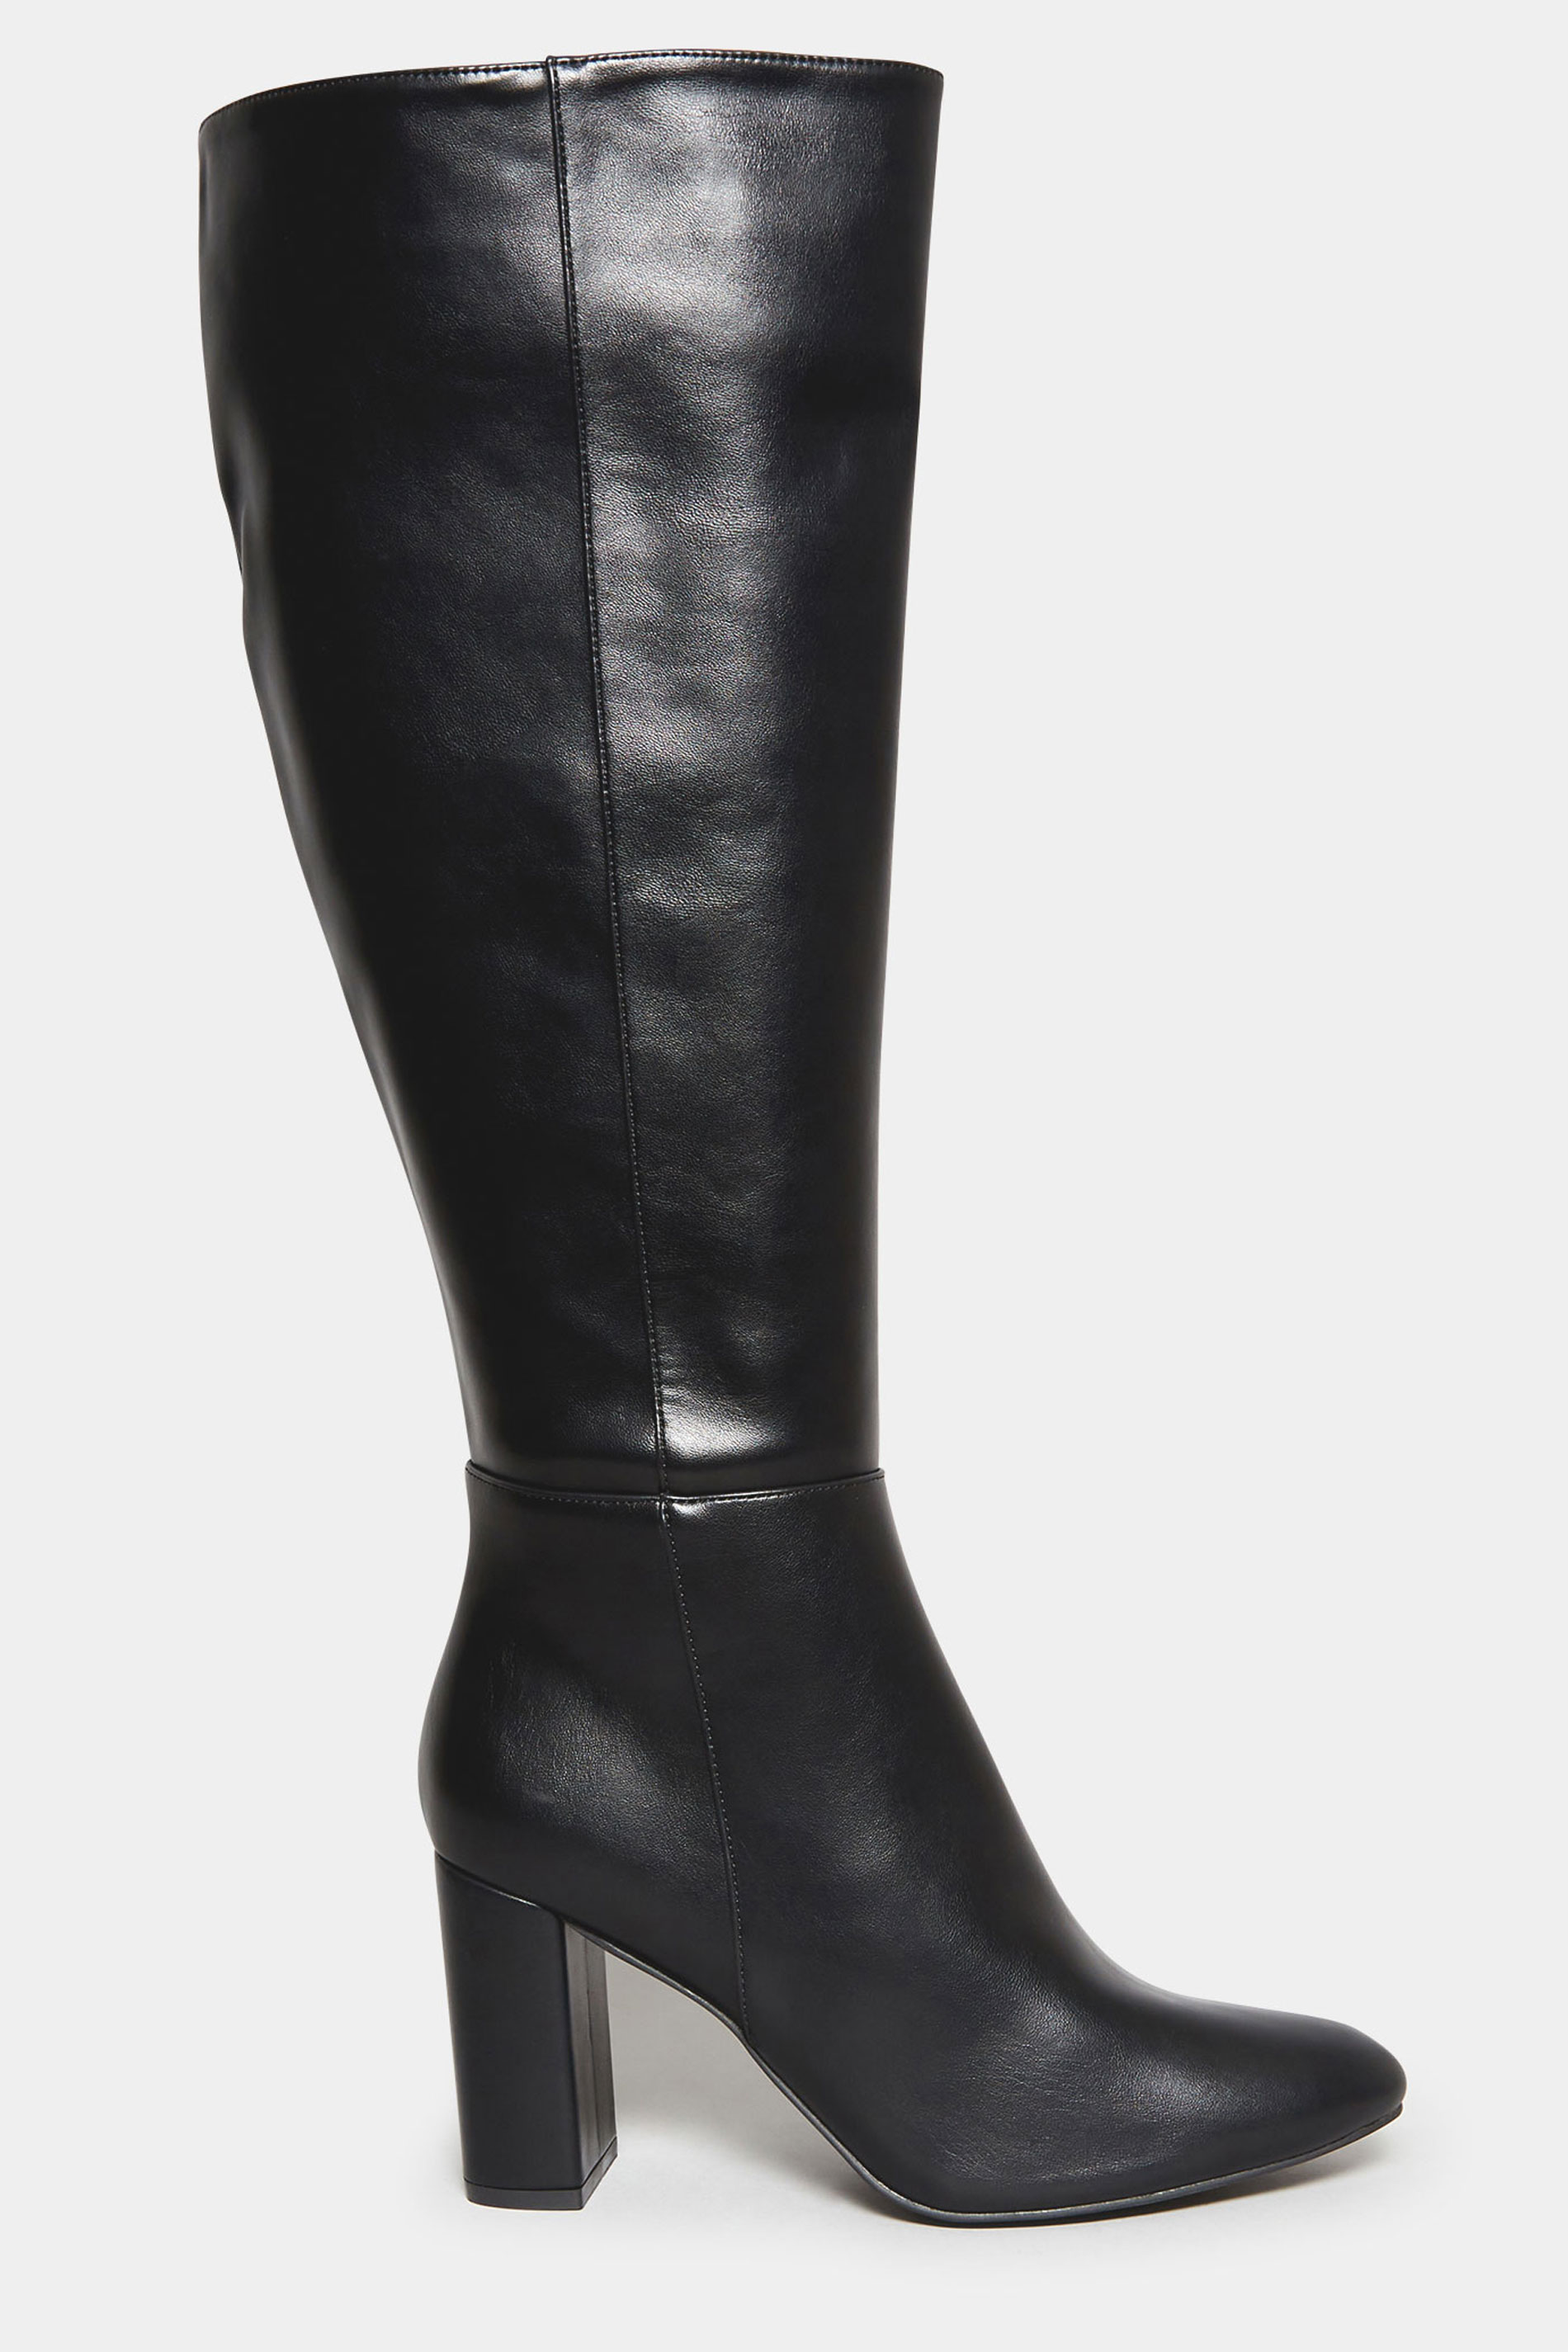 LIMITED COLLECTION Black Block Heel Knee High Boots In Standard D Fit ...